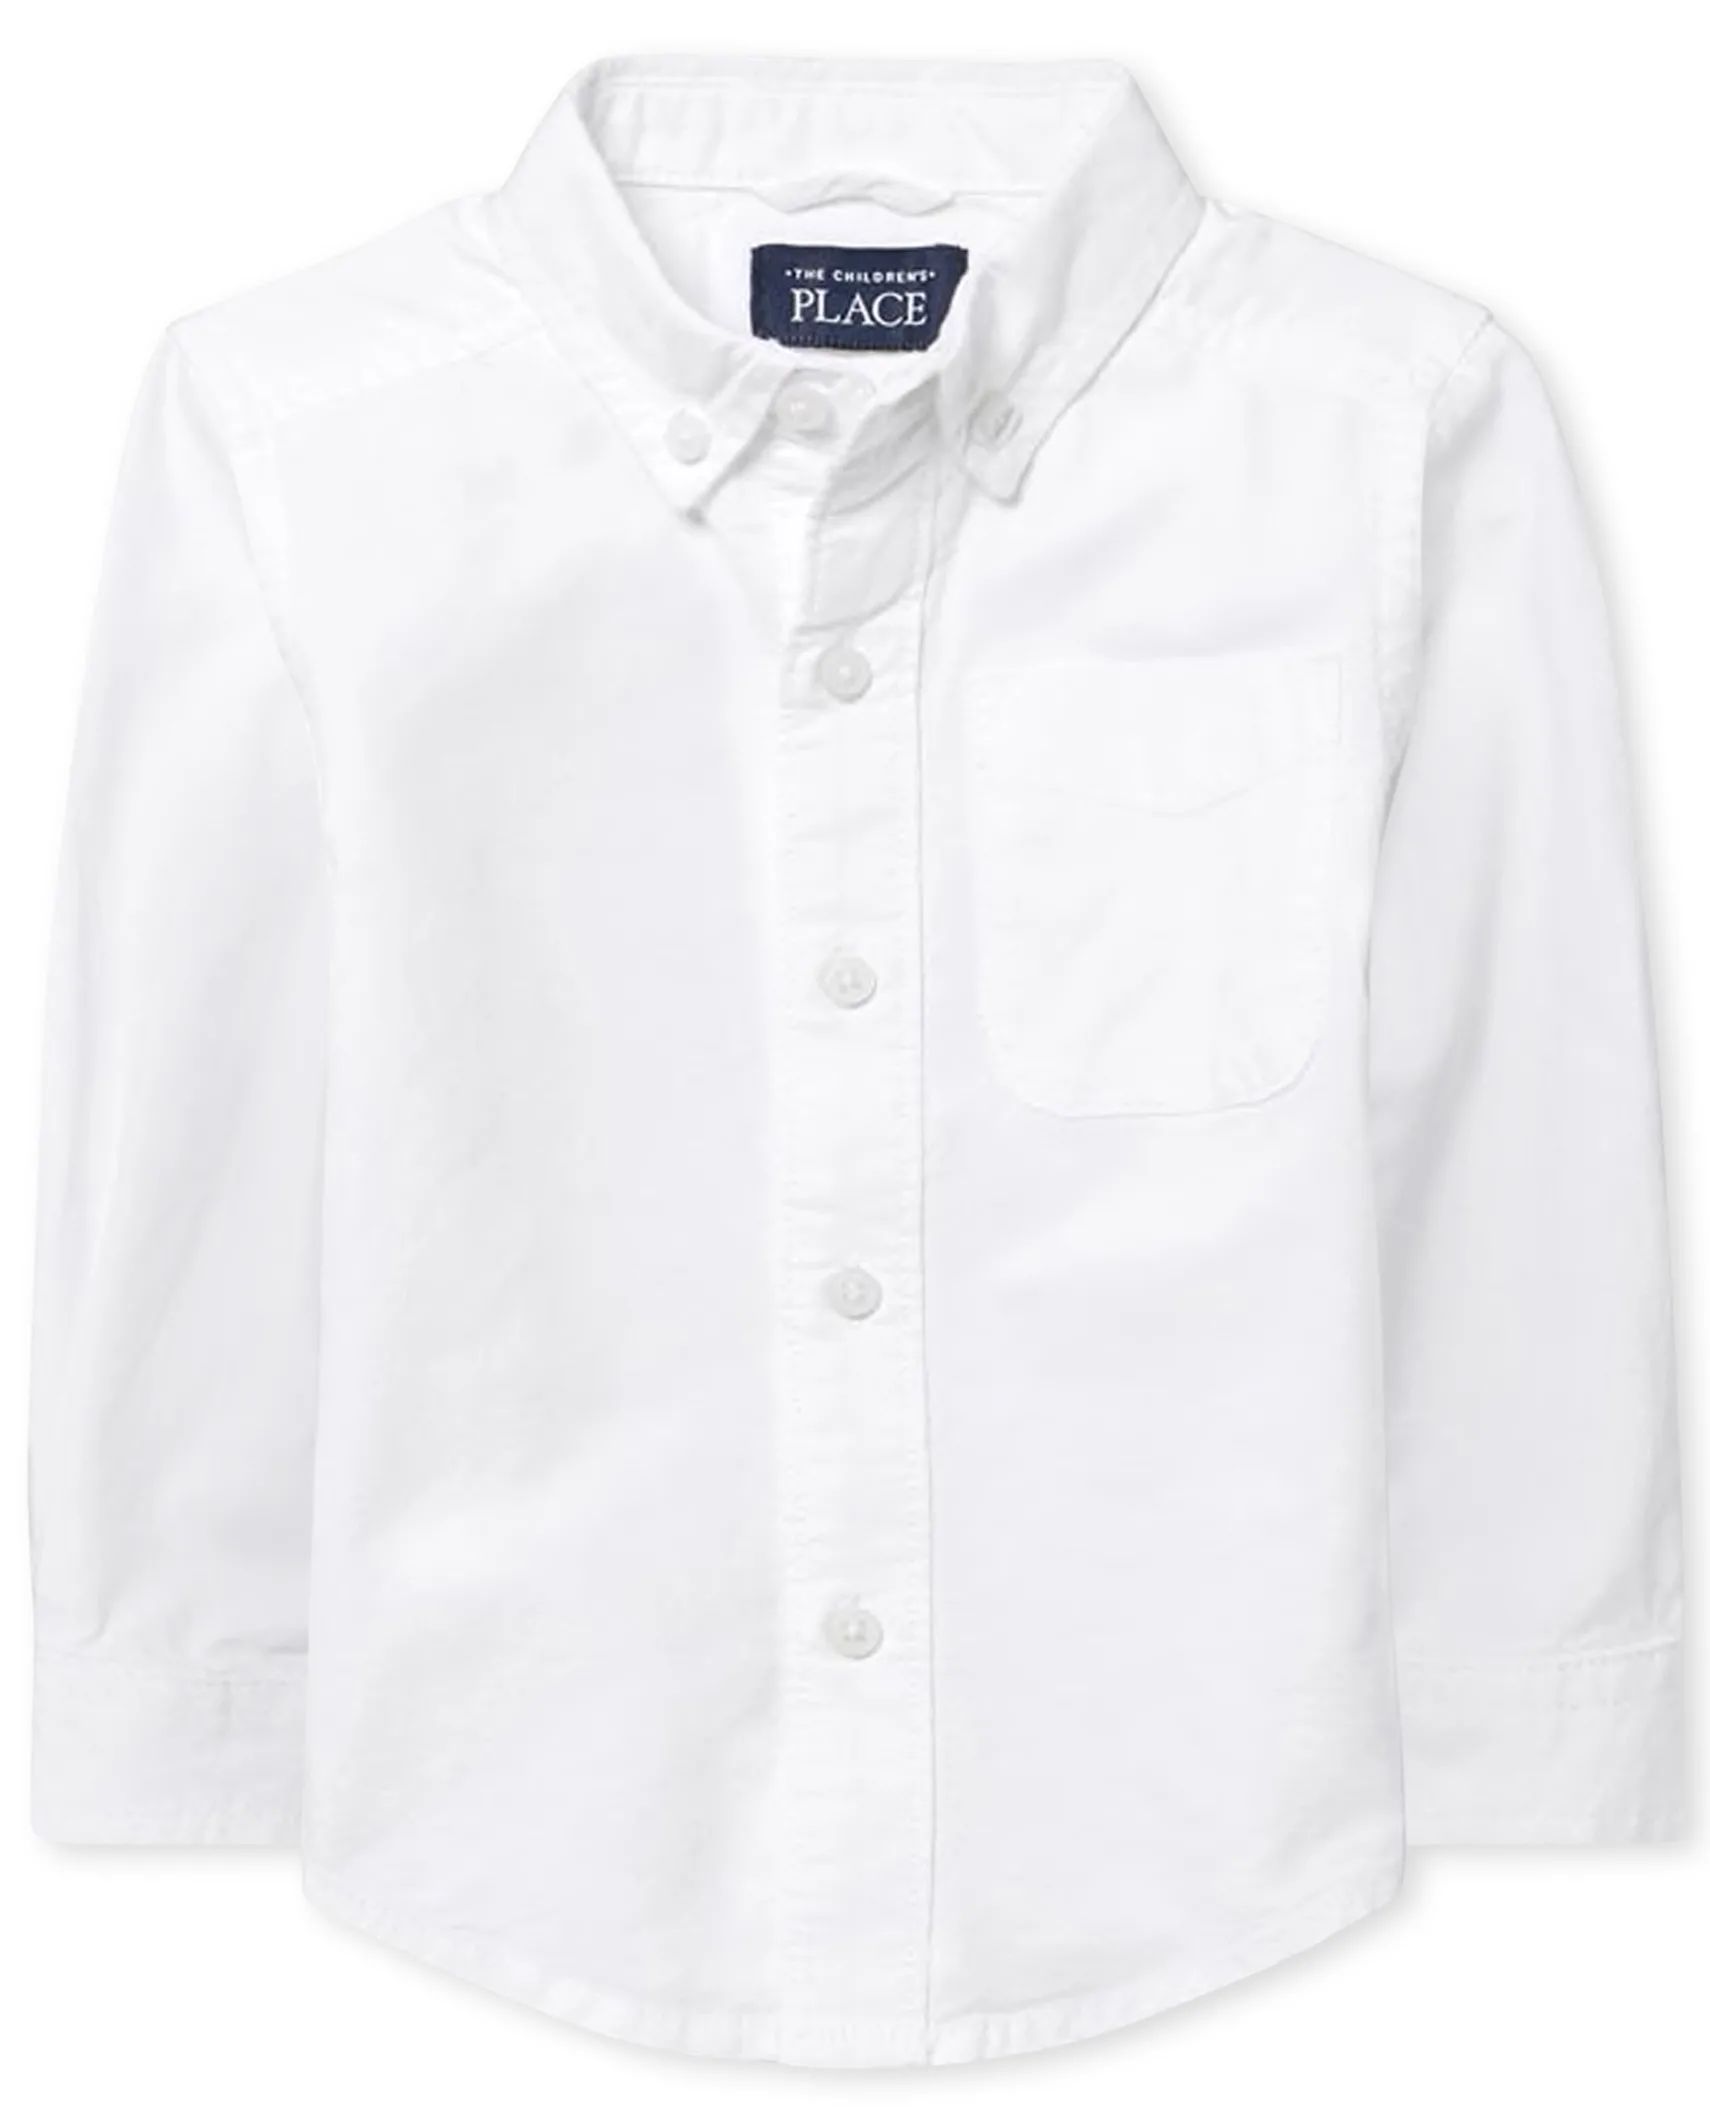 Baby And Toddler Boys Uniform Oxford Button Down Shirt - white | The Children's Place